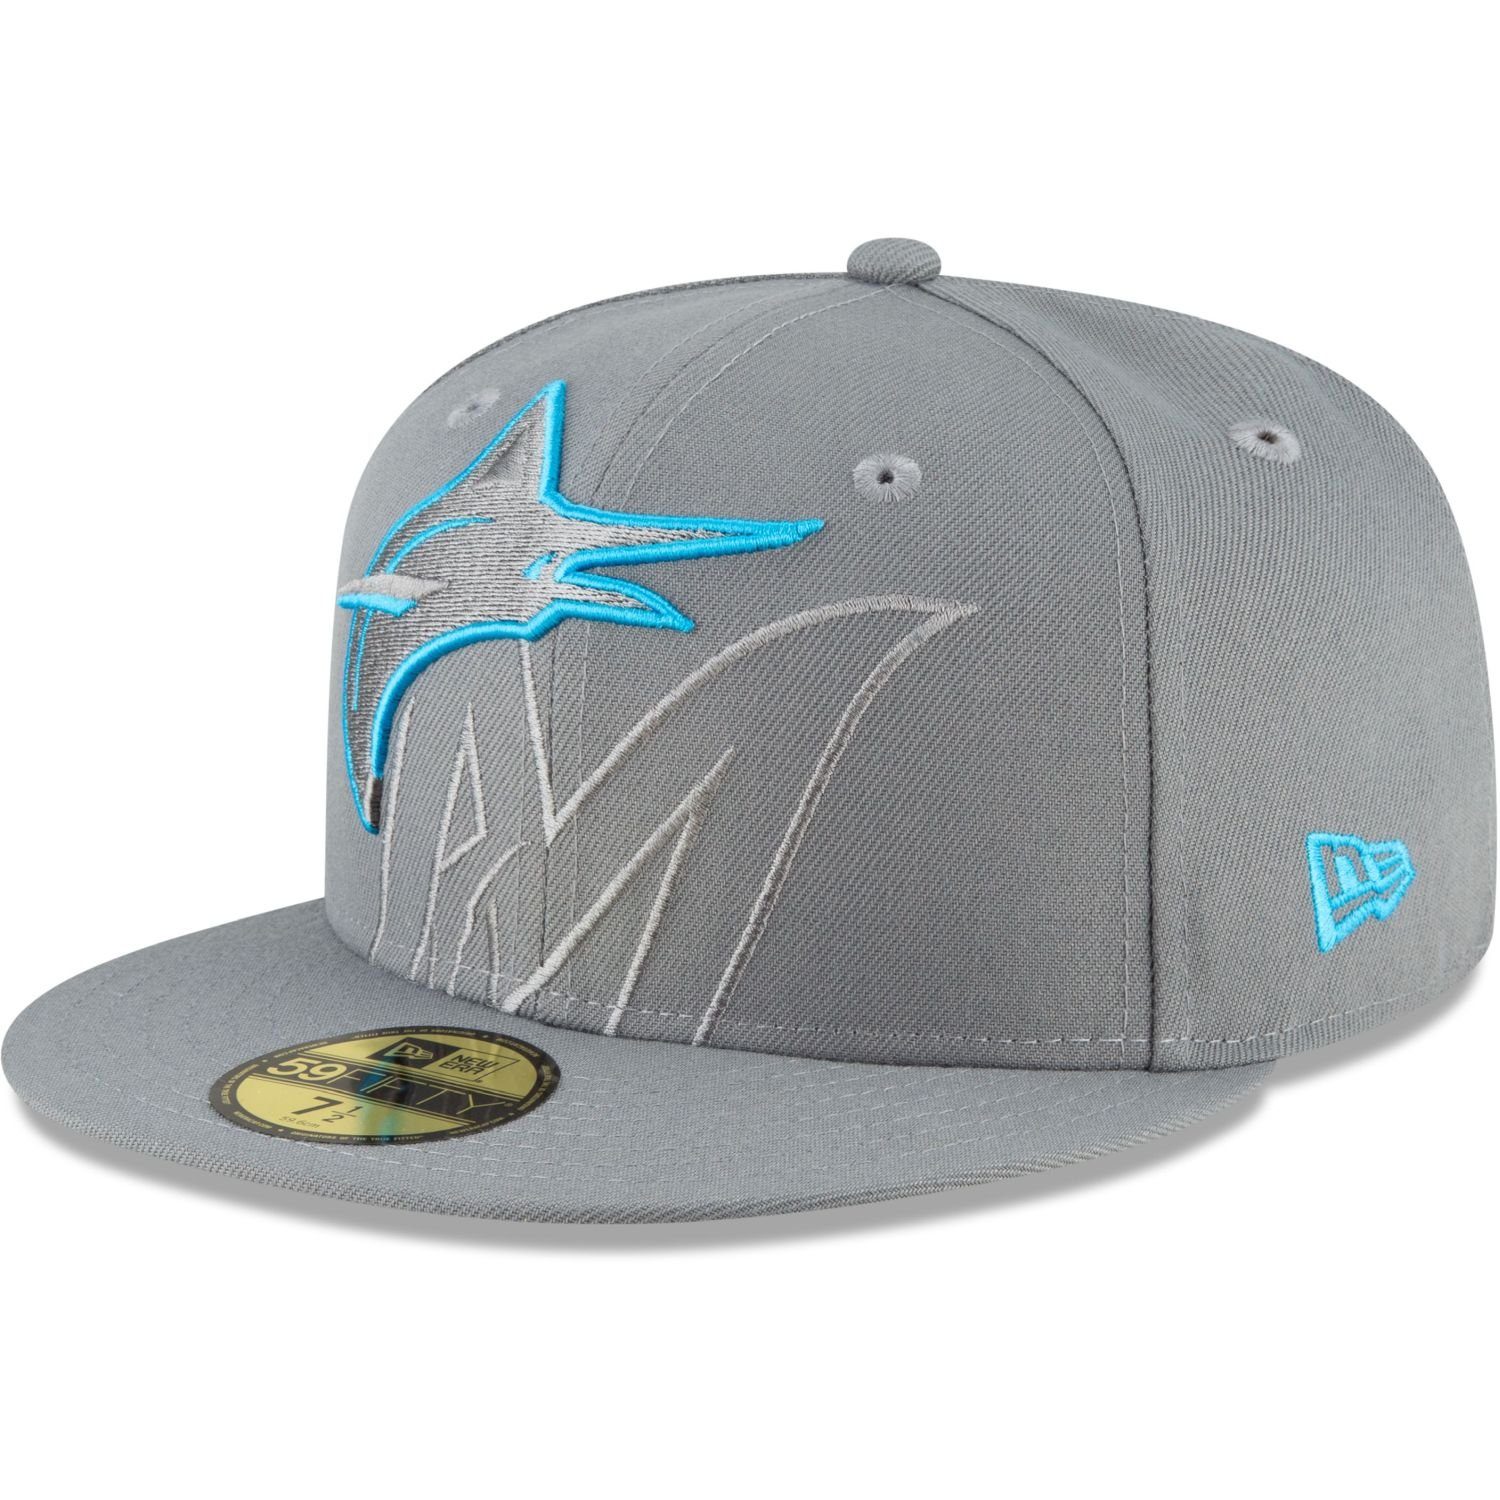 New Era Fitted GREY Marlins MLB 59Fifty Cooperstown STORM Team Cap Miami